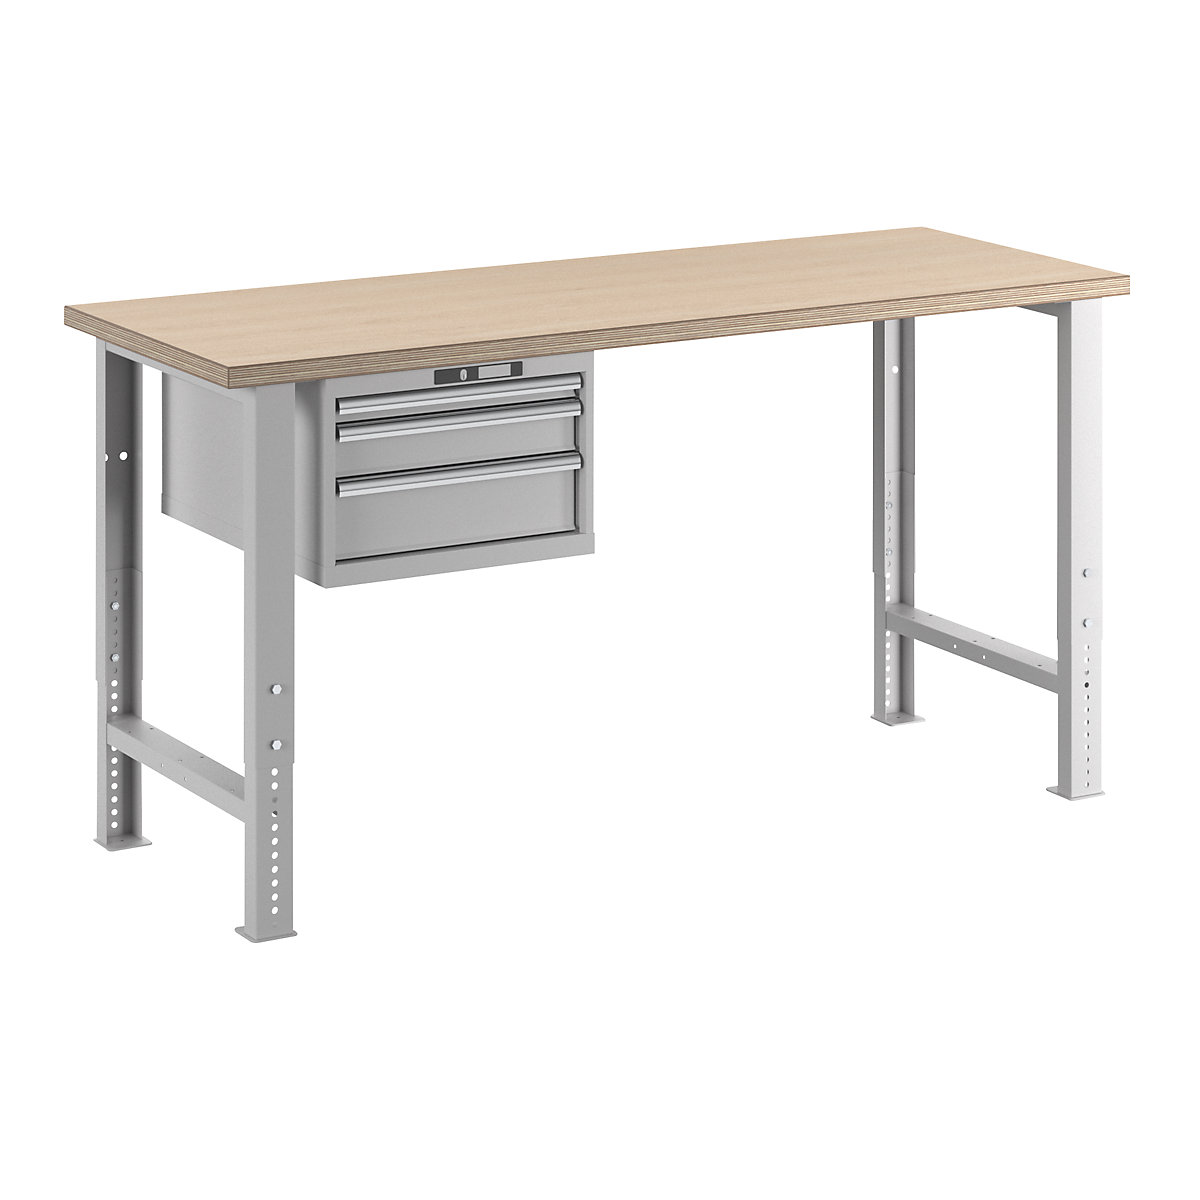 Modular workbench – LISTA, height 740 – 1090 mm, suspended drawer unit, 3 drawers, light grey, table width 2000 mm-10